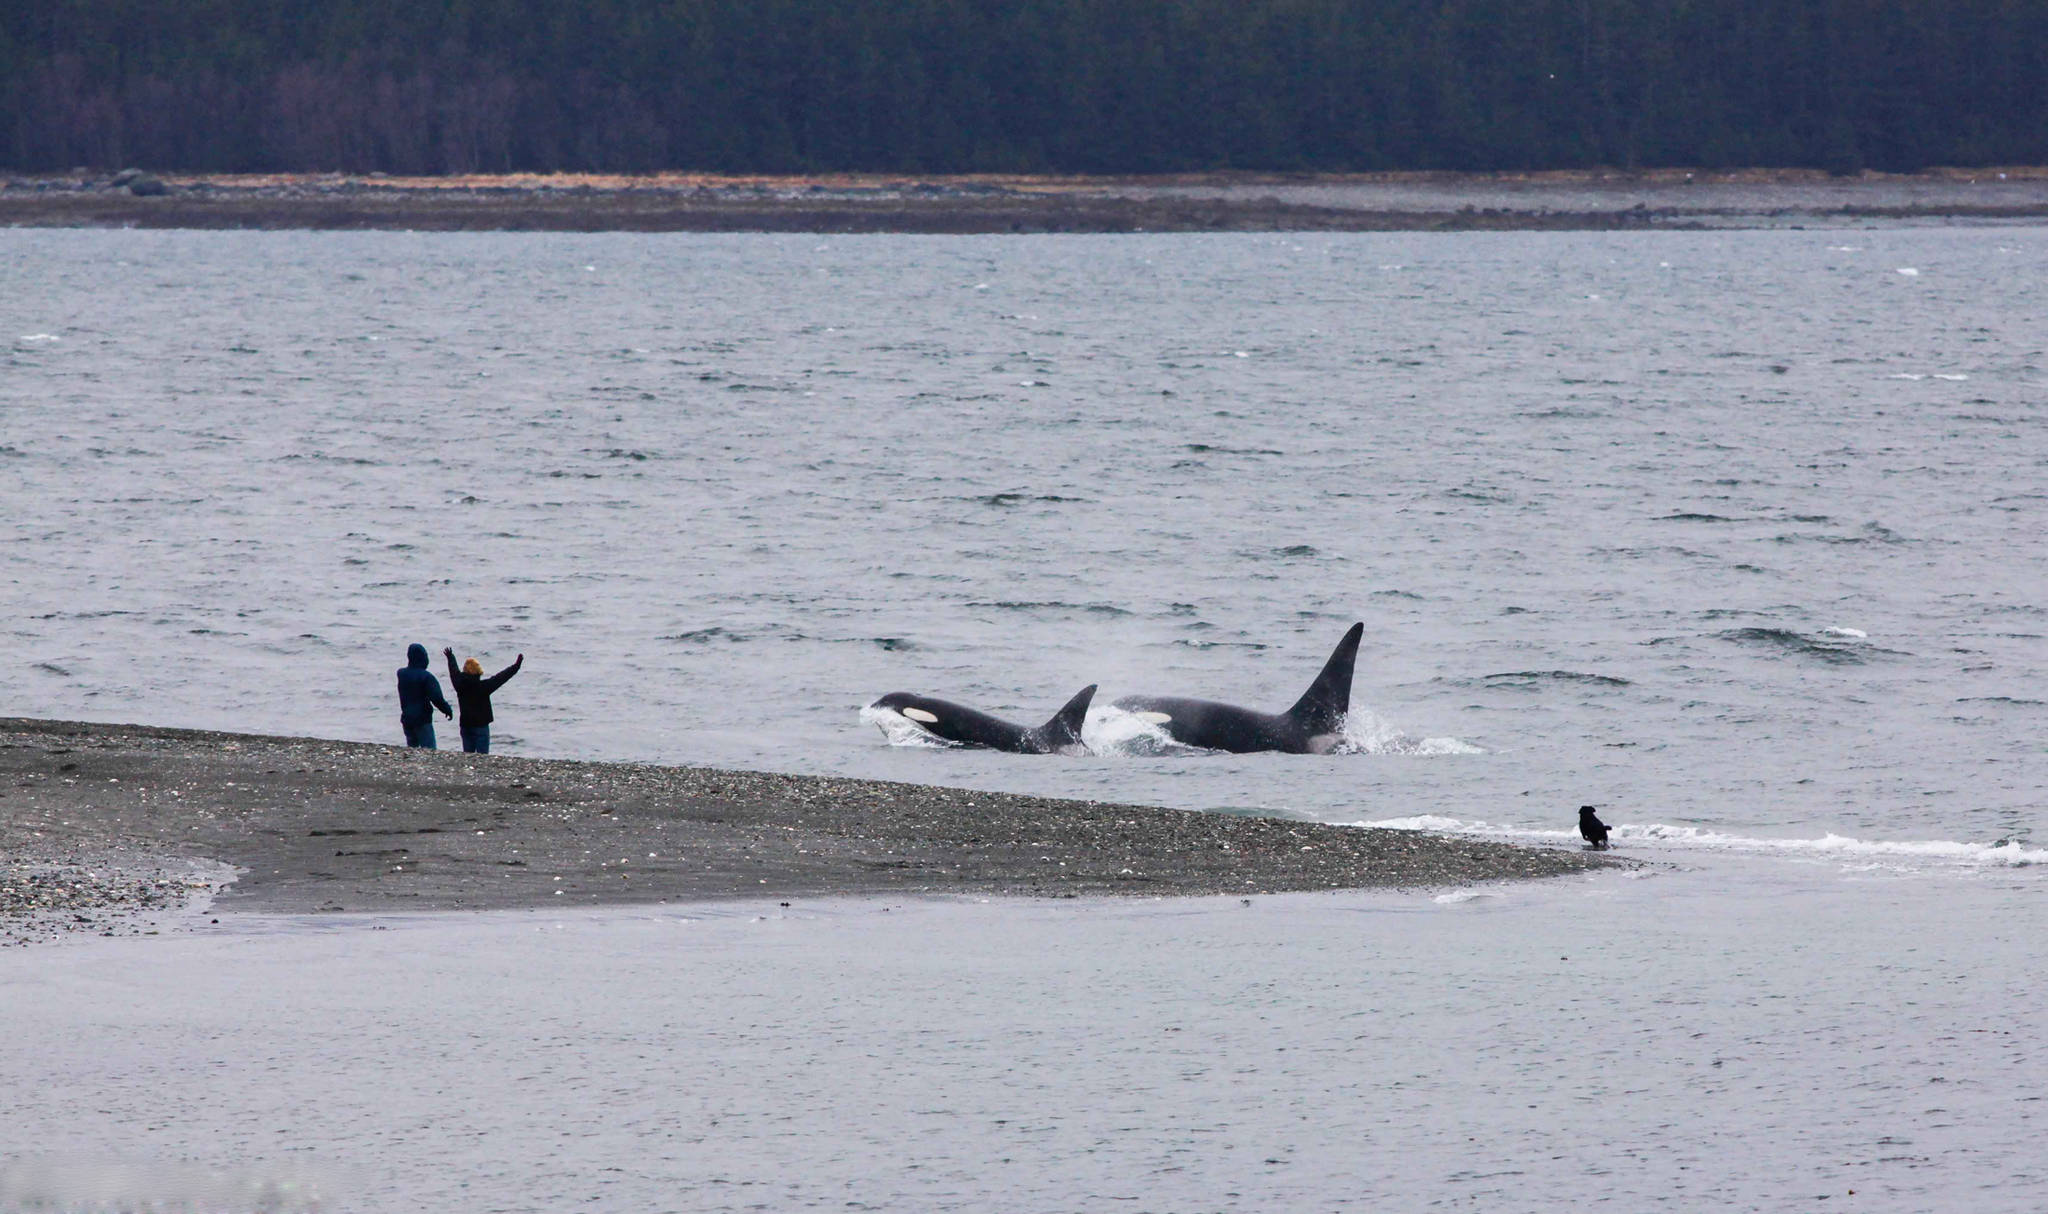 Jason, Eileen, and Merlin watch bull orca whales swim past South Shelter. Photo by Jay Beedle.